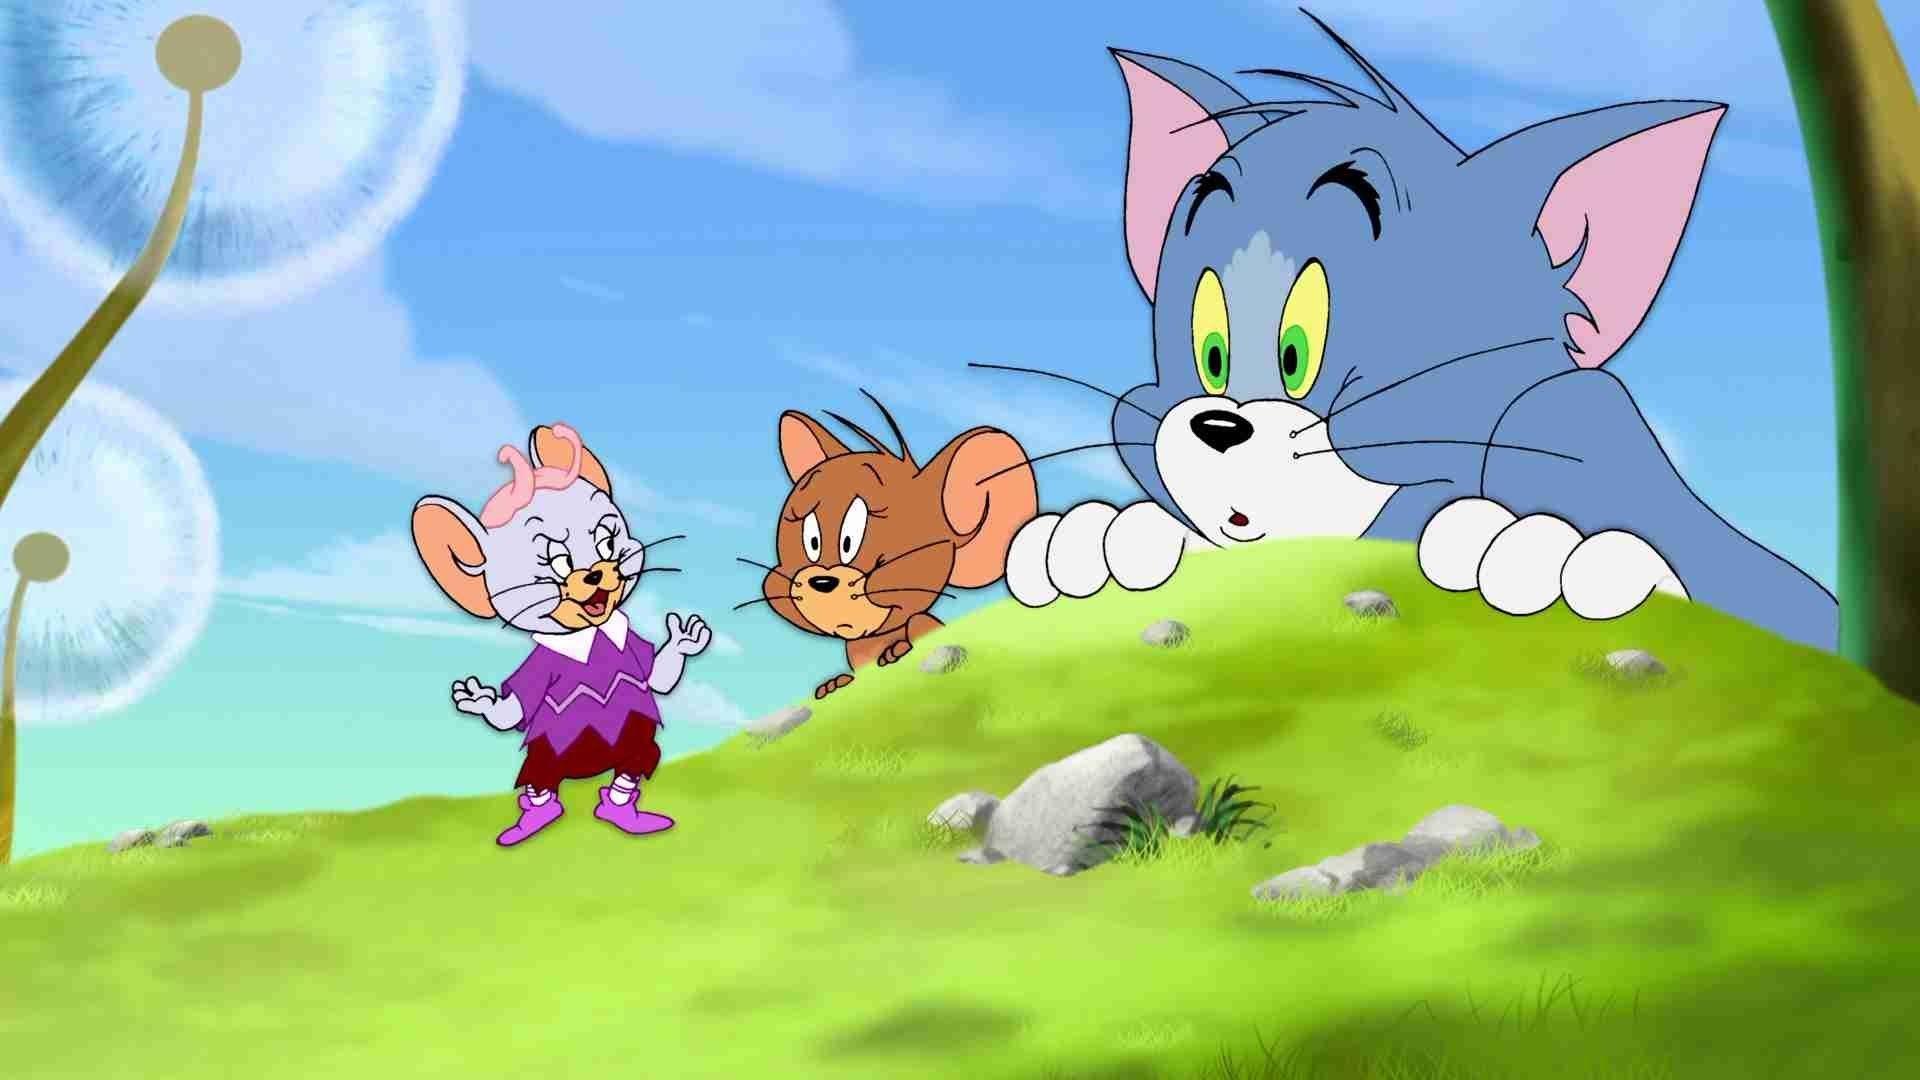 Wallpaper at Tucson: 1080p HD Tom And Jerry Wallpaper HD Download